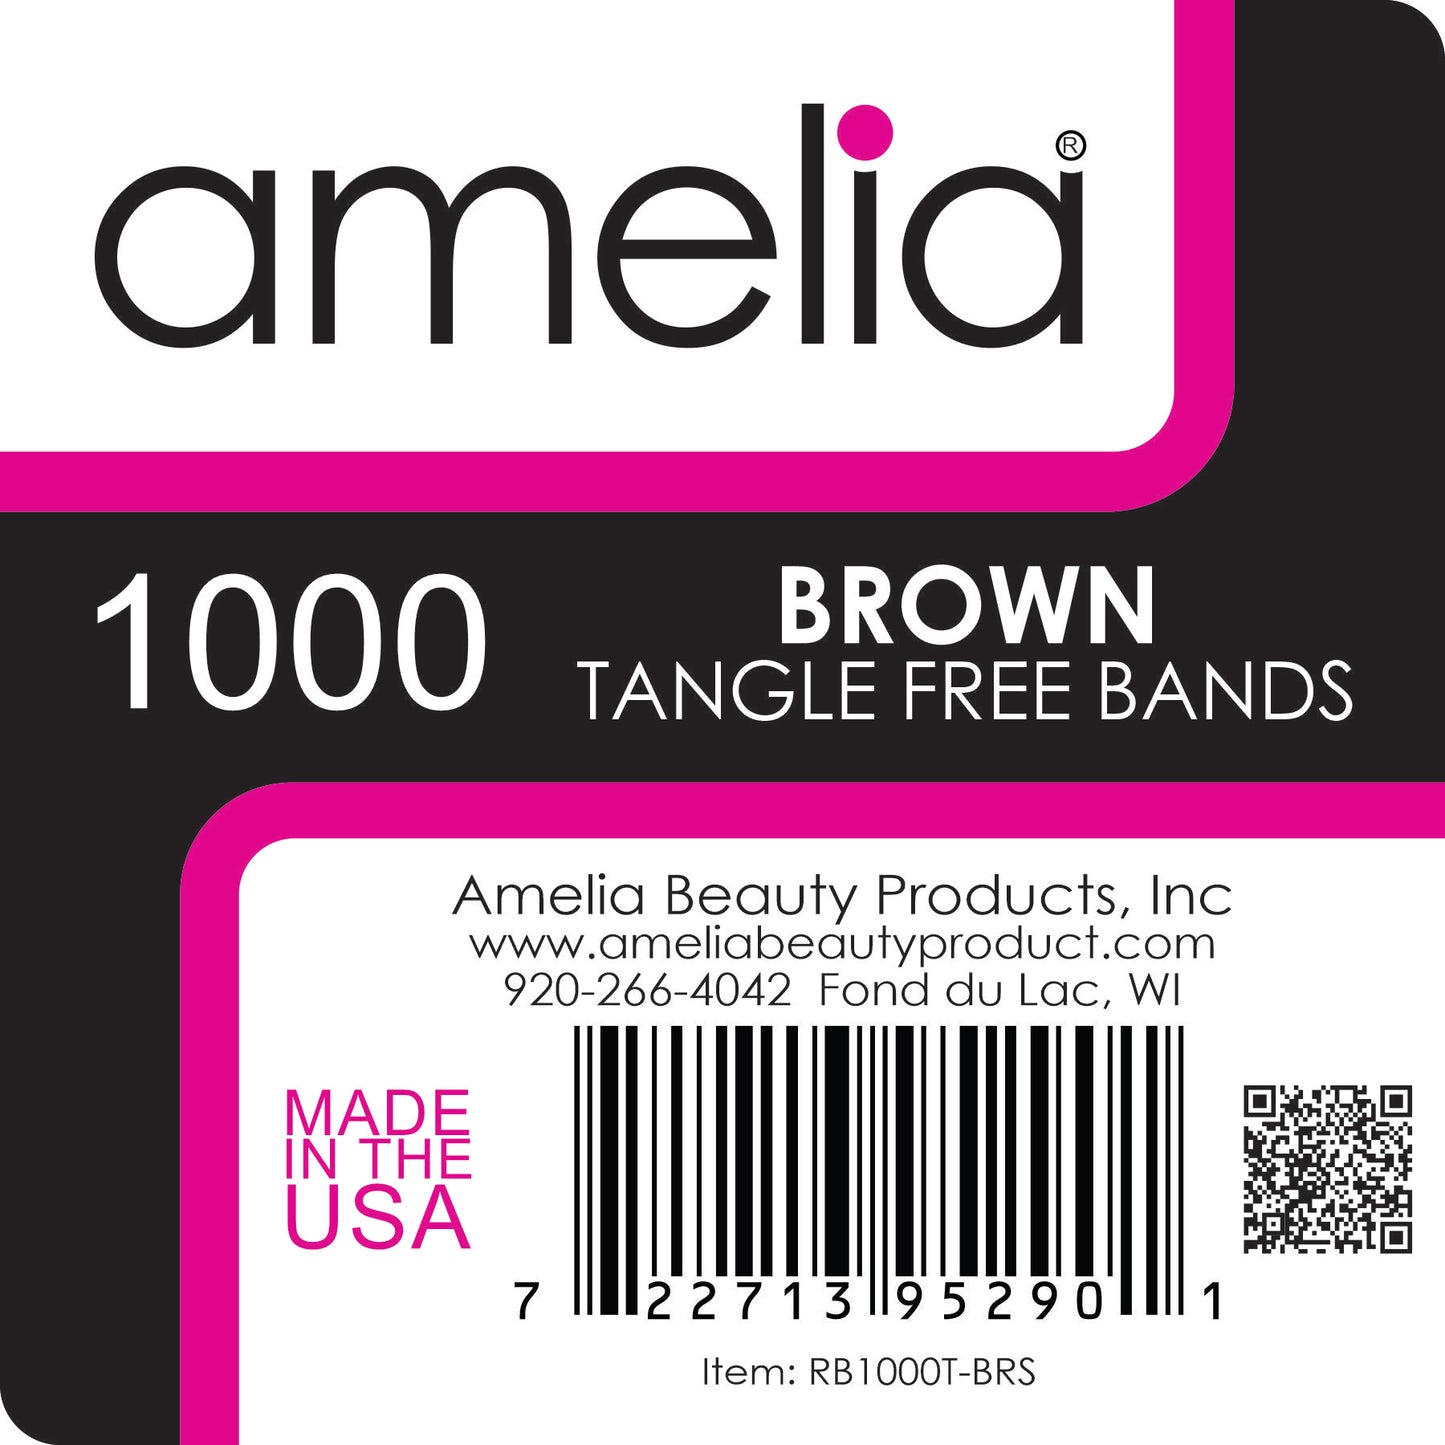 Amelia Beauty | 1/2in, Brown, Tangle Free Elastic Pony Tail Holders | Made in USA, Ideal for Ponytails, Braids, Twists. For Women, Girls. Pain Free, Snag Free, Easy Off | 1000 Pack